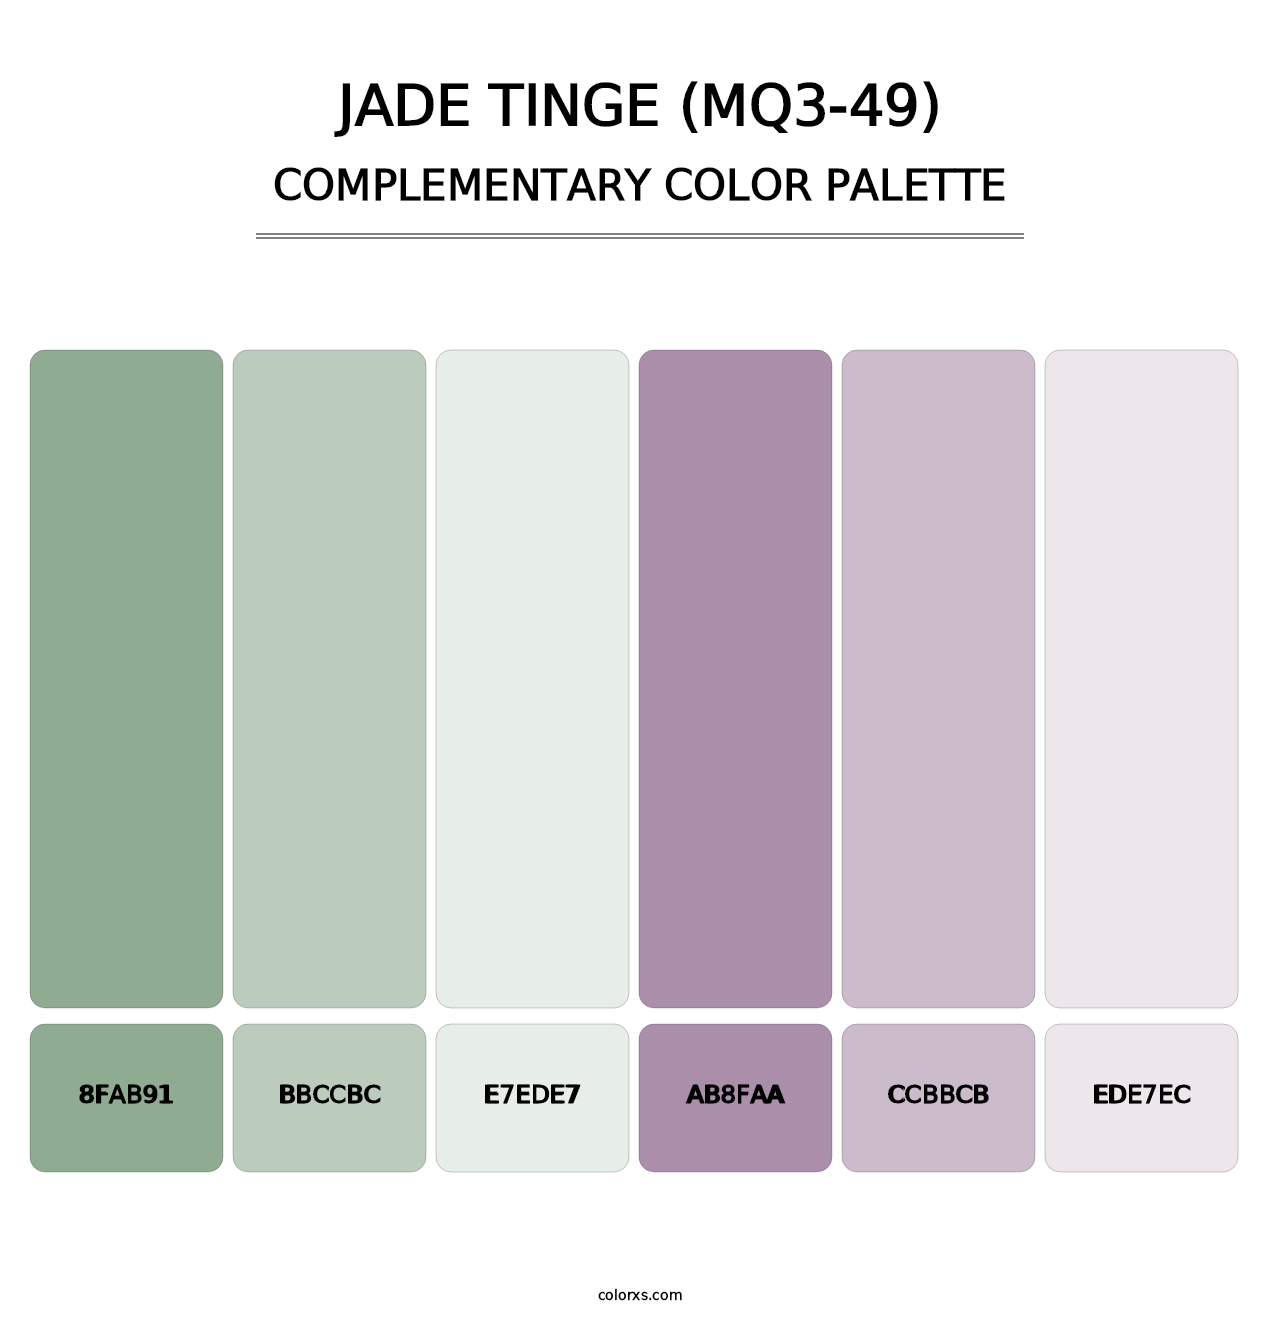 Jade Tinge (MQ3-49) - Complementary Color Palette